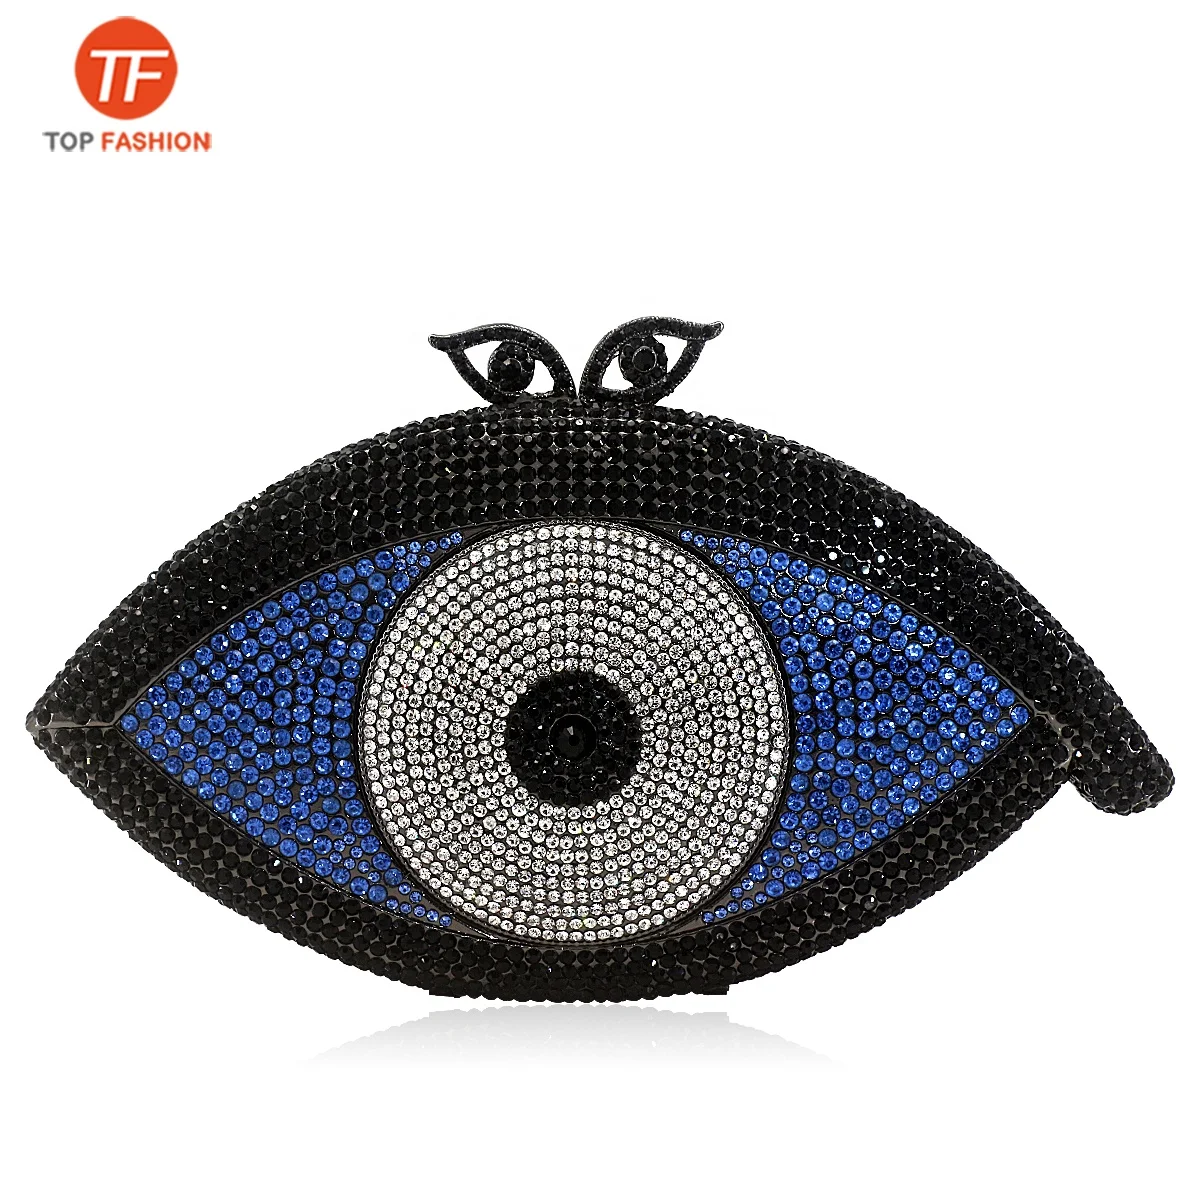 

China Factory Wholesales Crystal Rhinestone Clutch Evening Bag for Party Evil Eye Shaped Diamante Clutch Purse, ( accept customized )